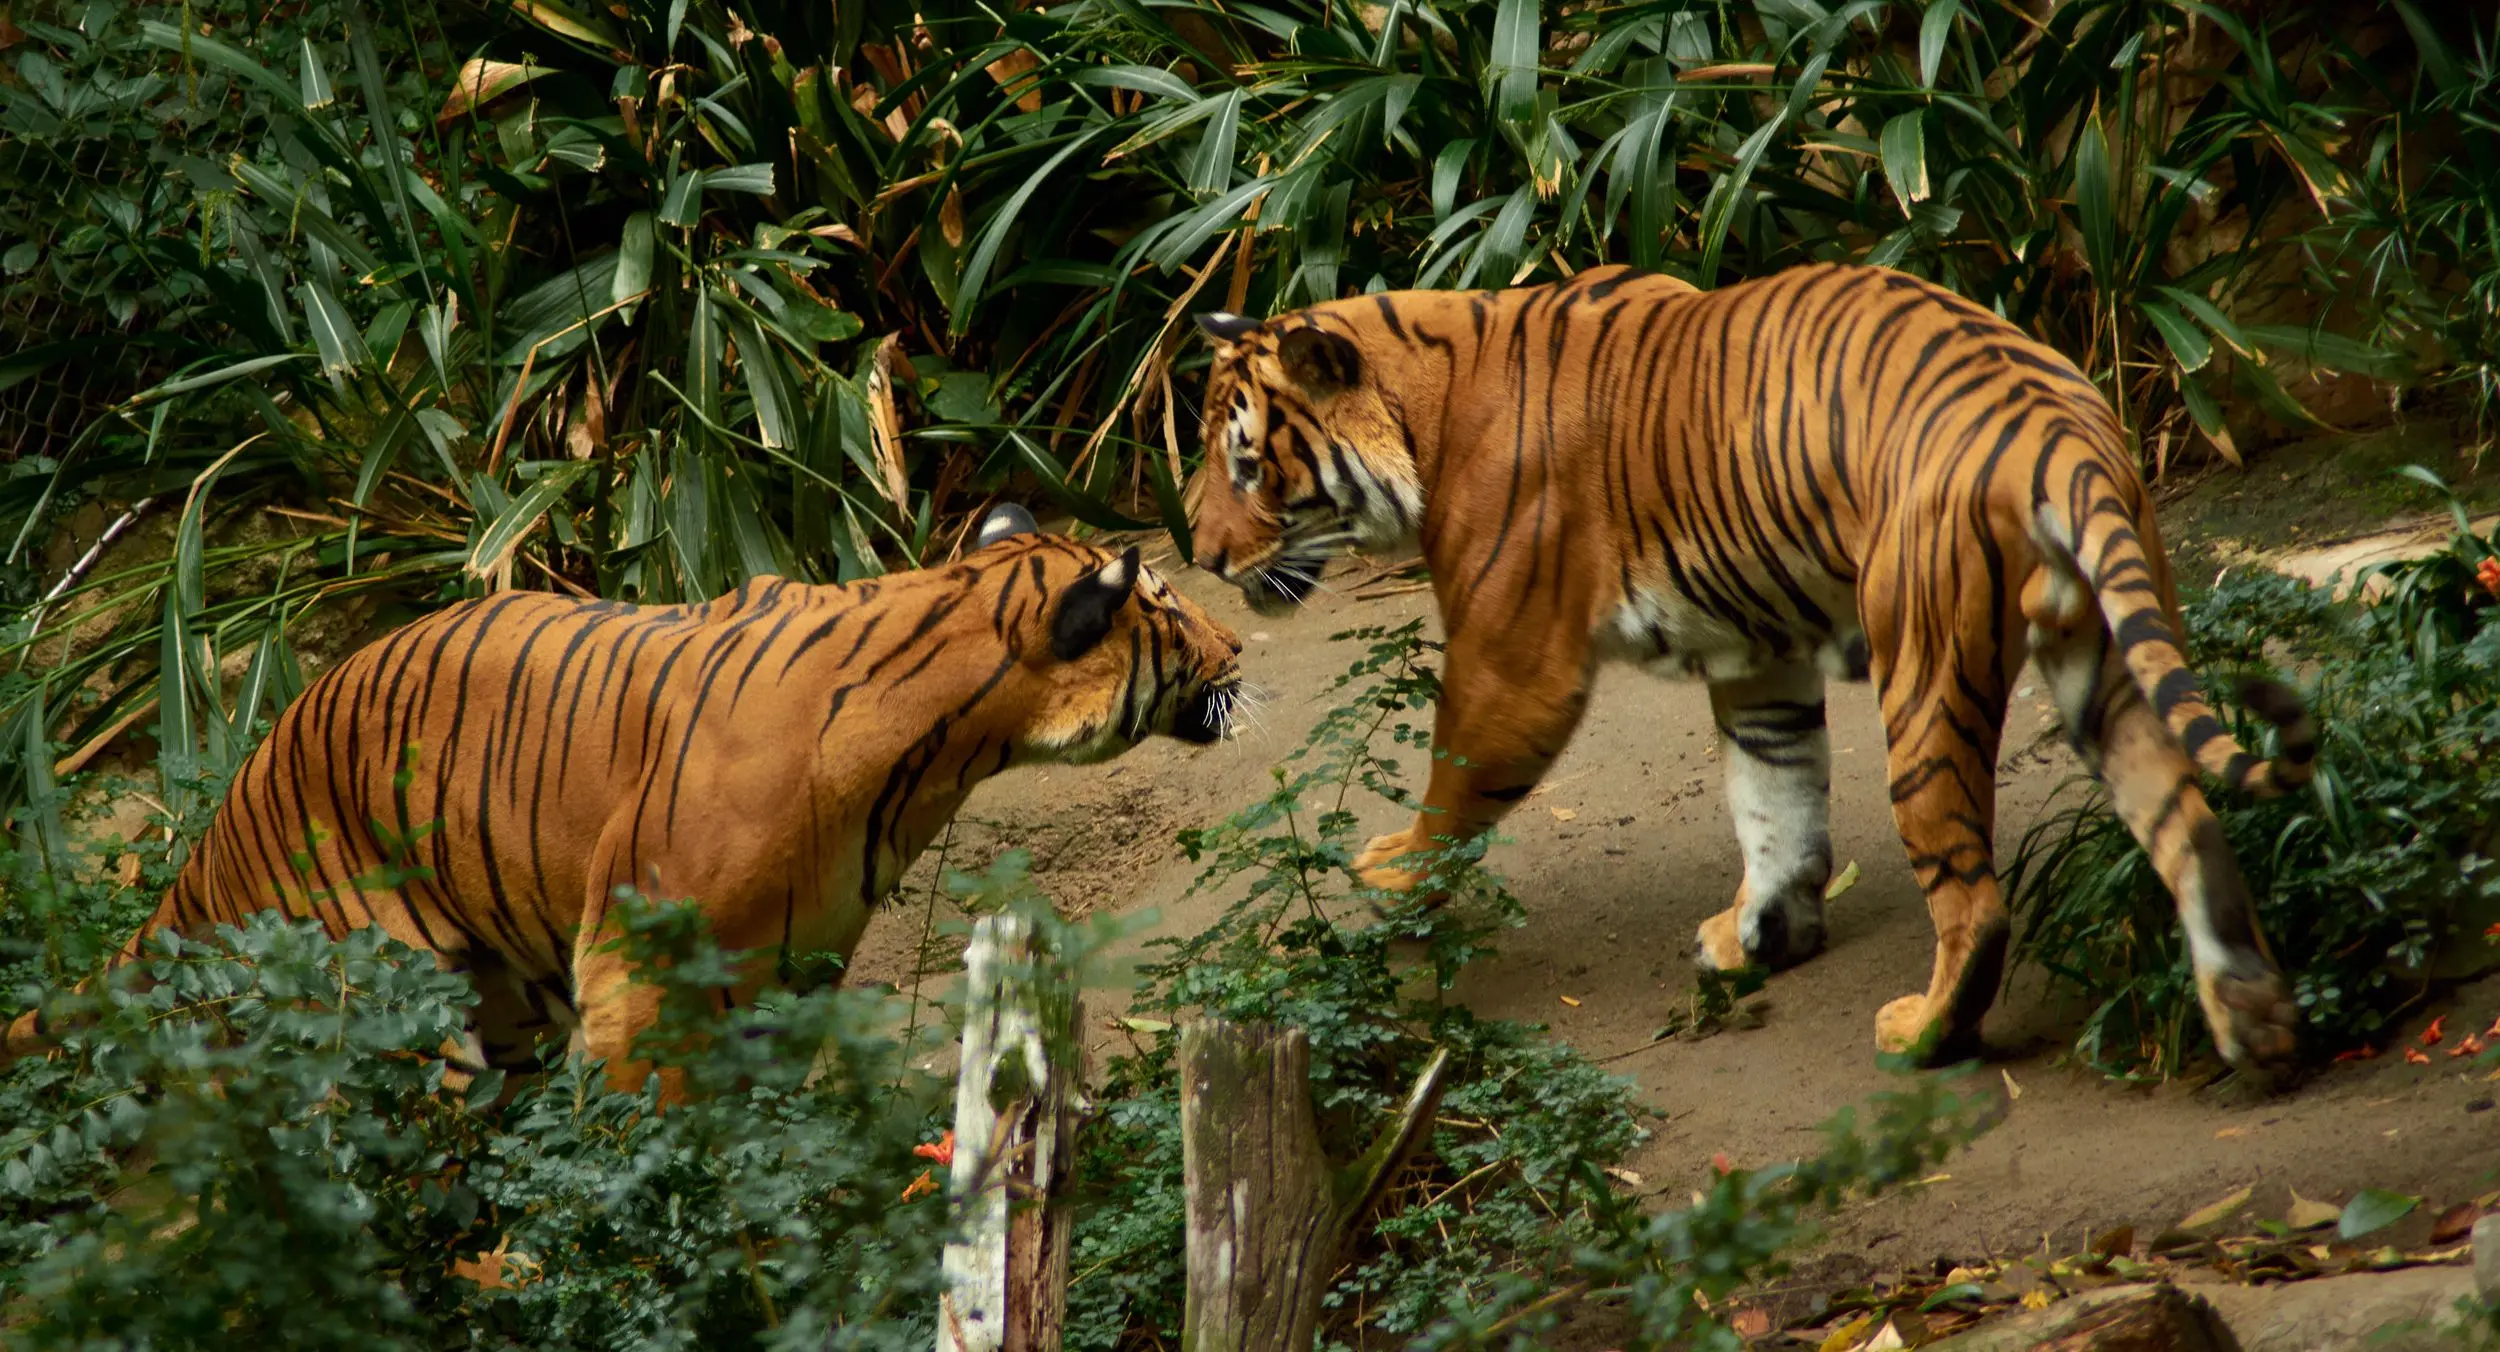 Two tigers make eye contact while walking past each other.